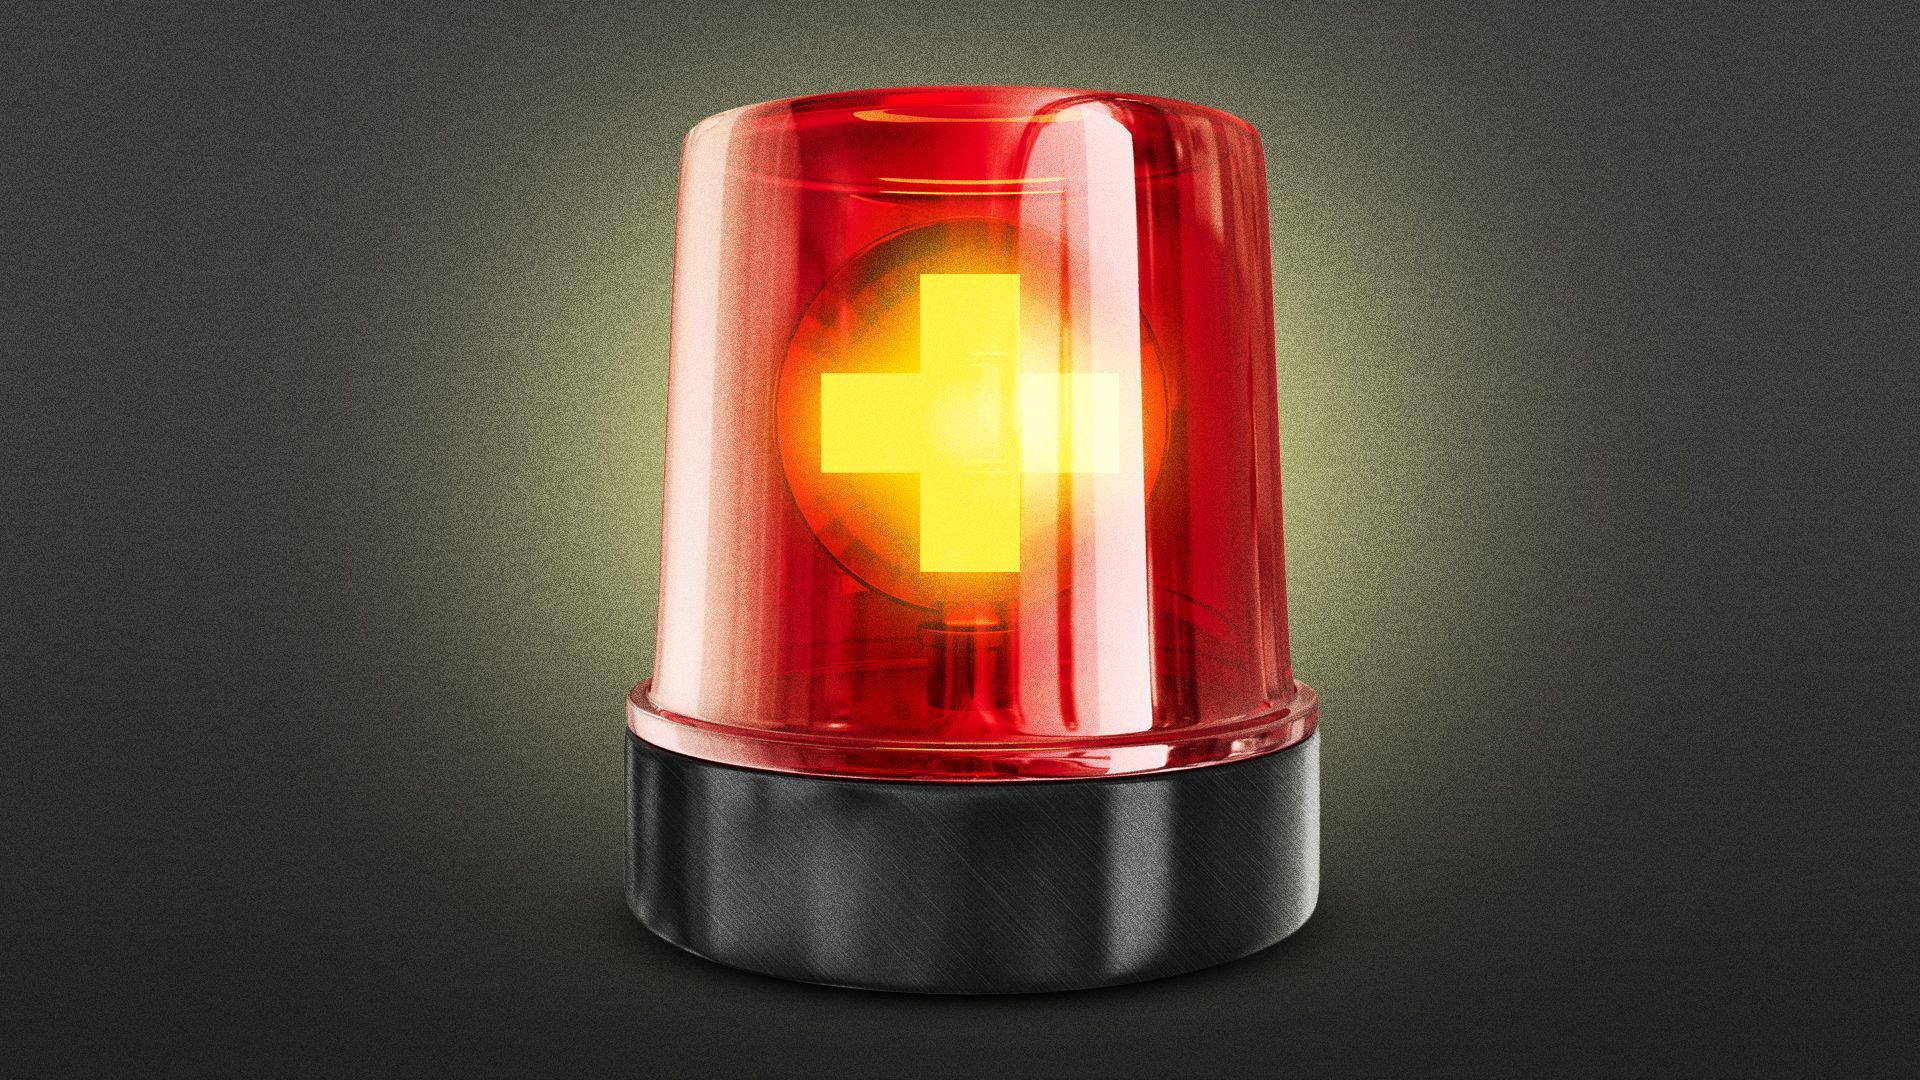 Illustration of an emergency siren with a health symbol as the light. 